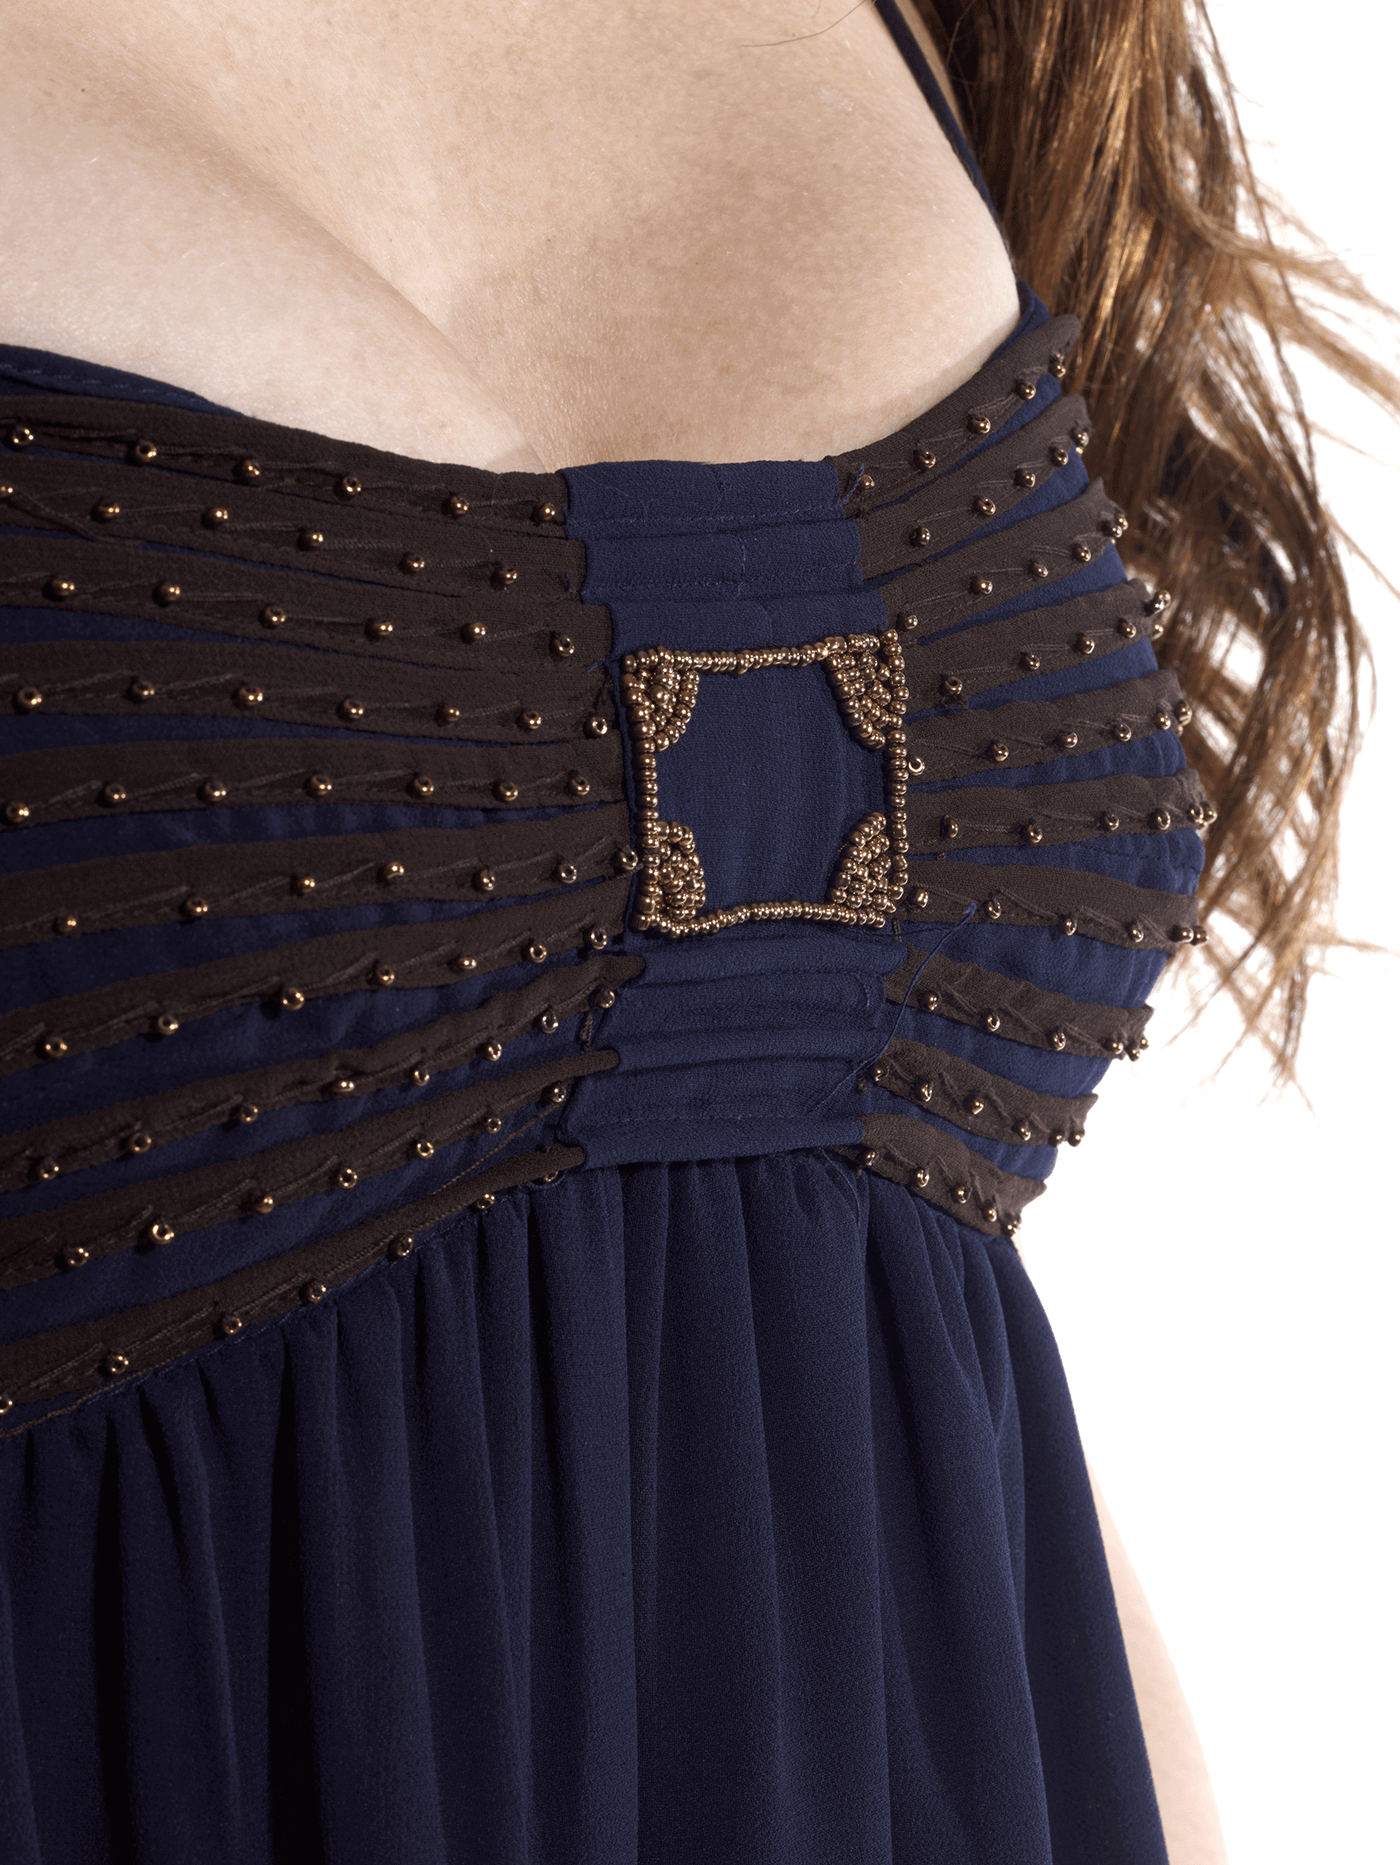 Blue Flowy Dress with Gold Embellishments